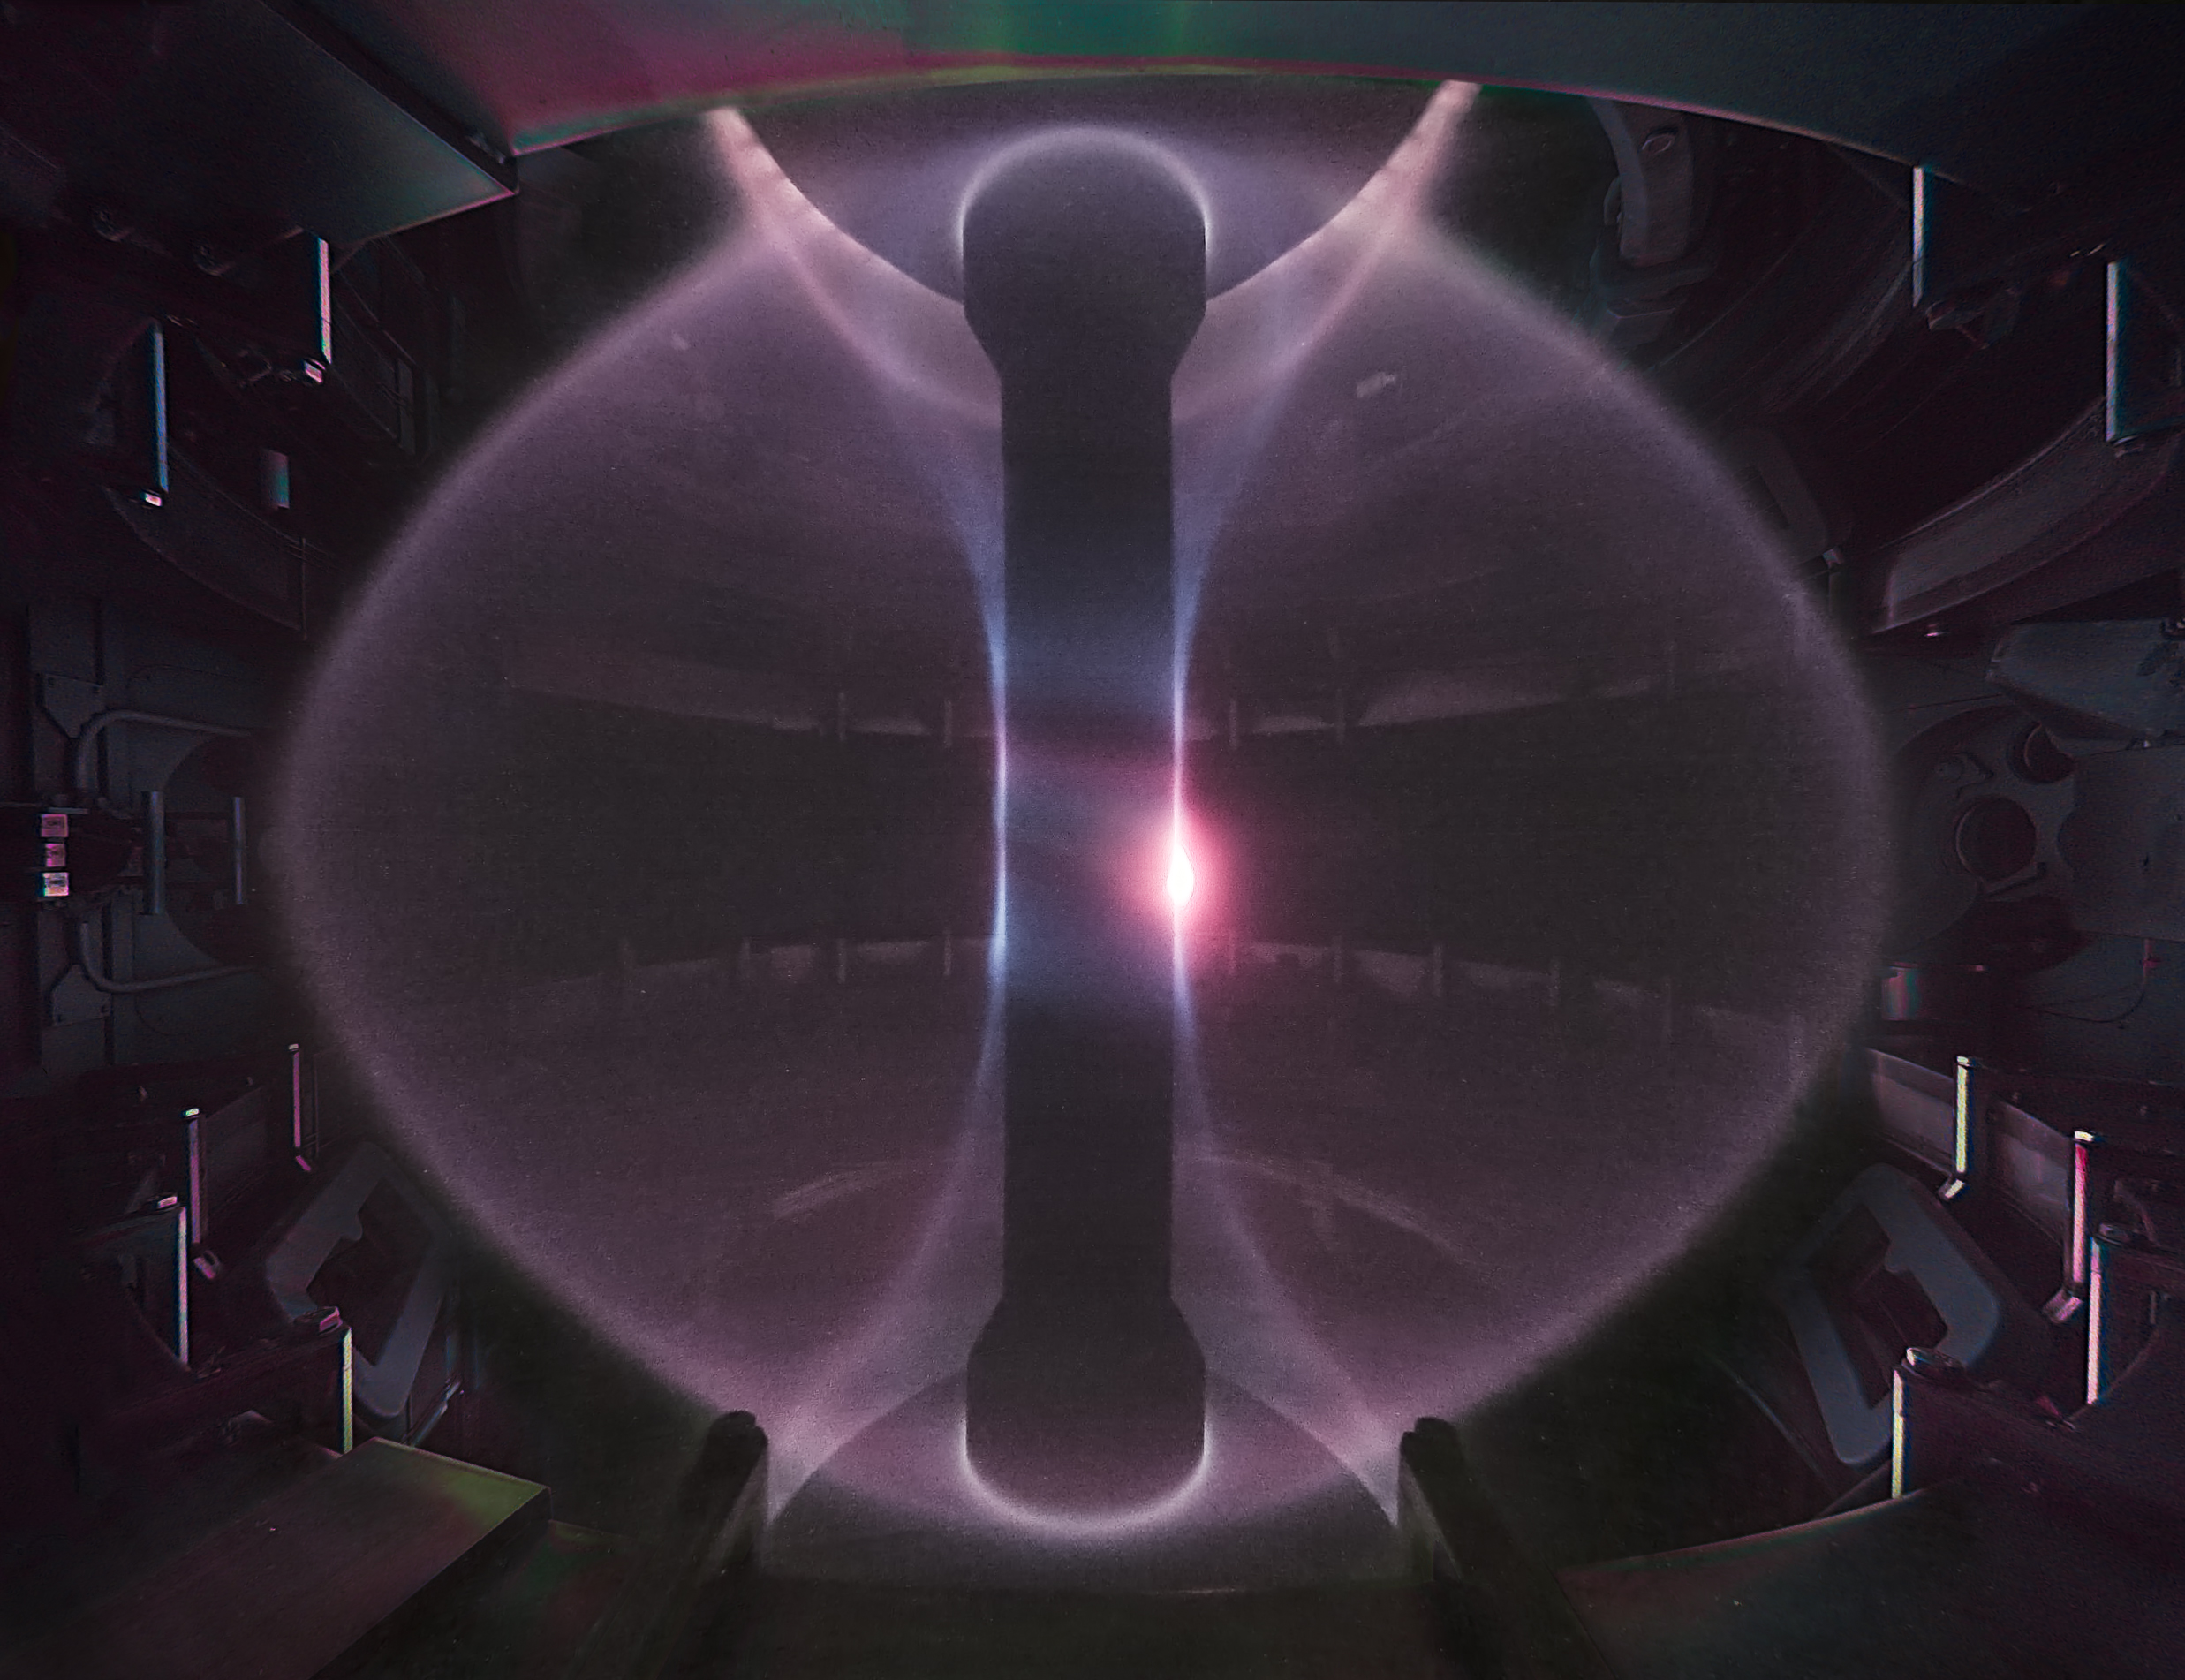 Image of plasma in Culham Centre for Fusion Energy